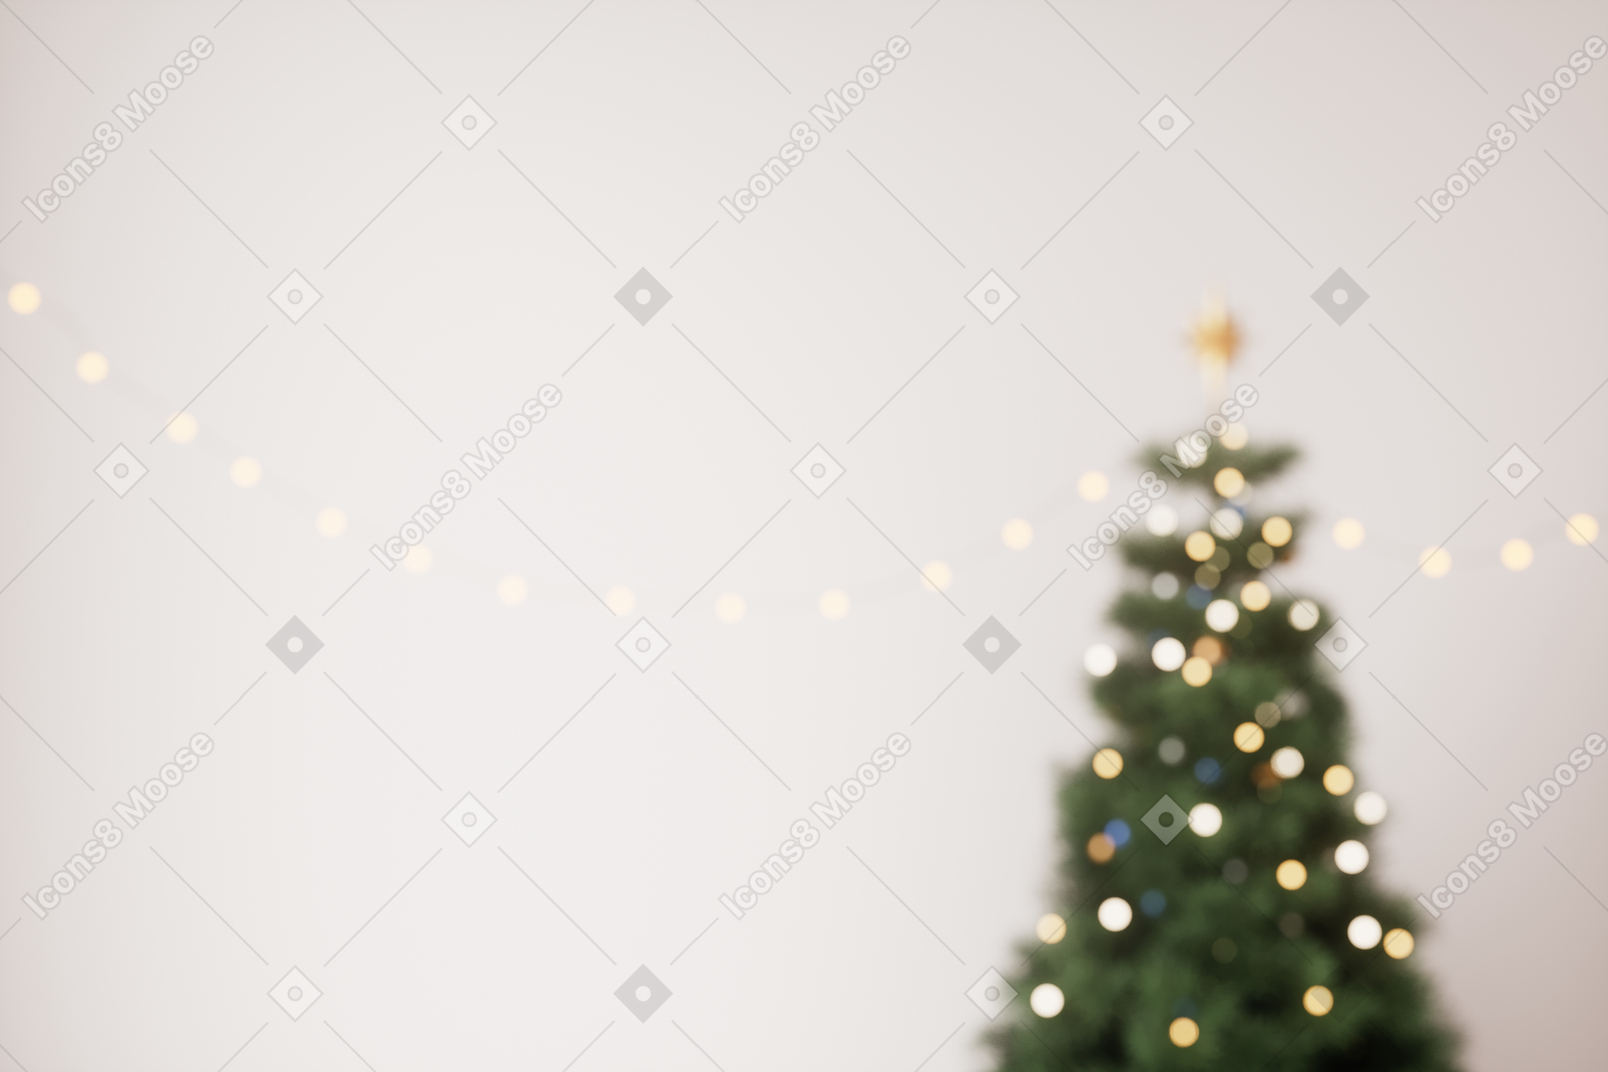 Blurred christmas tree decorated with fairy lights